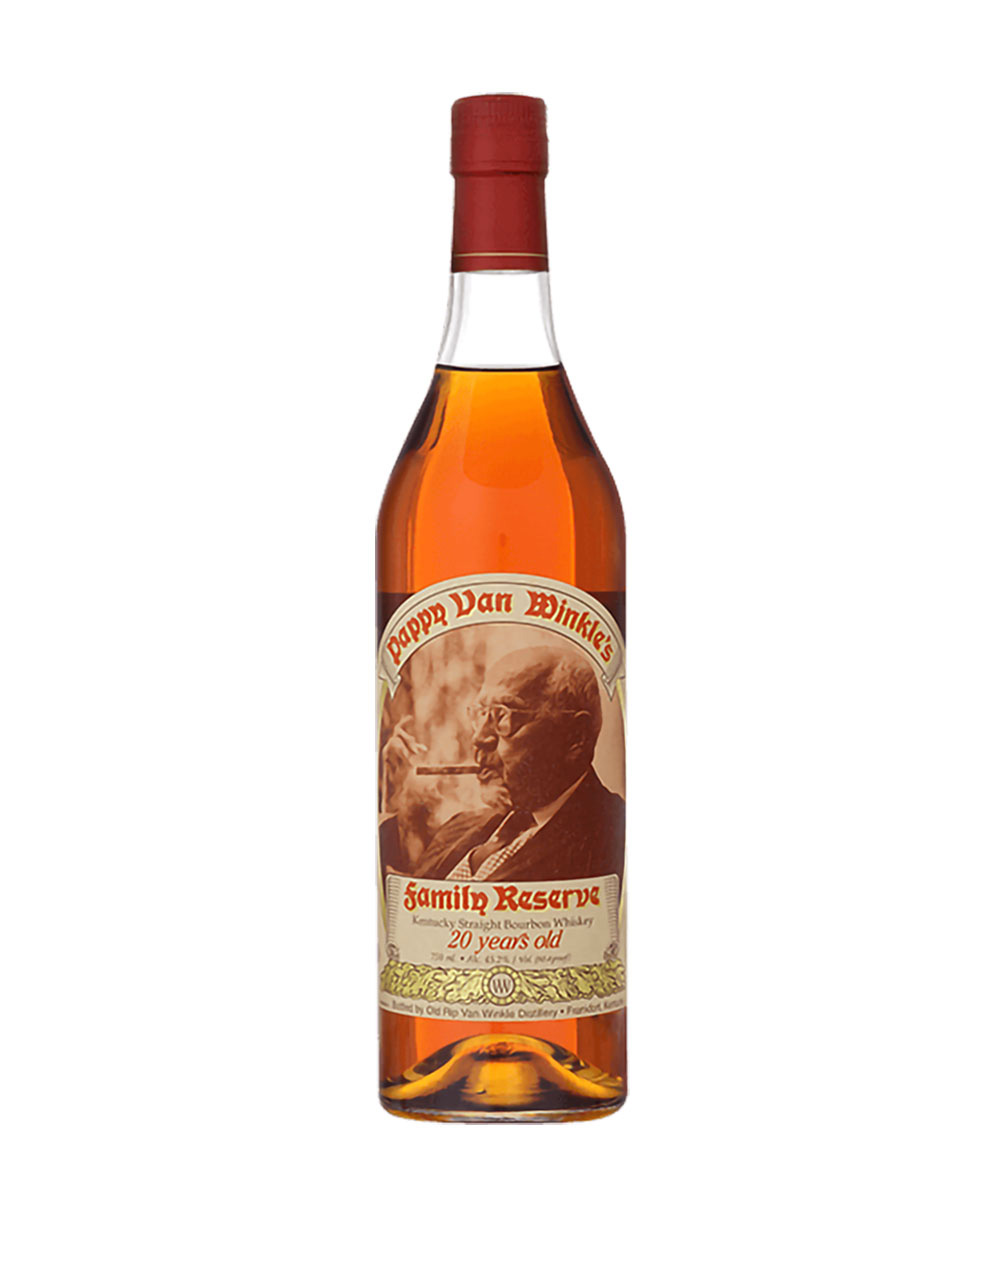 Pappy Van Winkles Family Reserve 20 Years Bourbon Whiskey